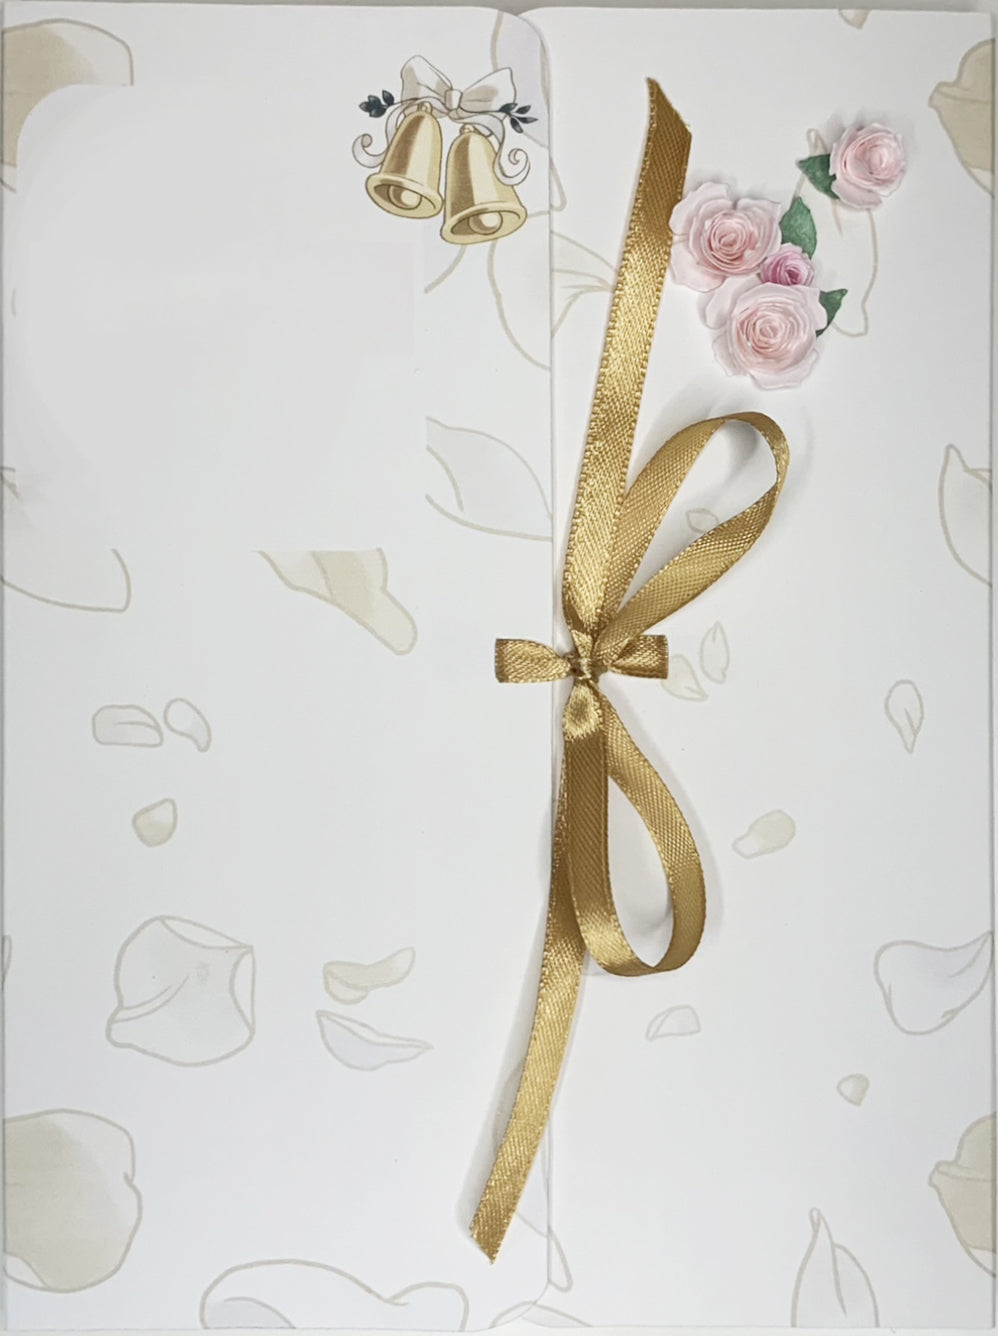 Personalised folder for wedding card - handmade roses and old gold ribbon